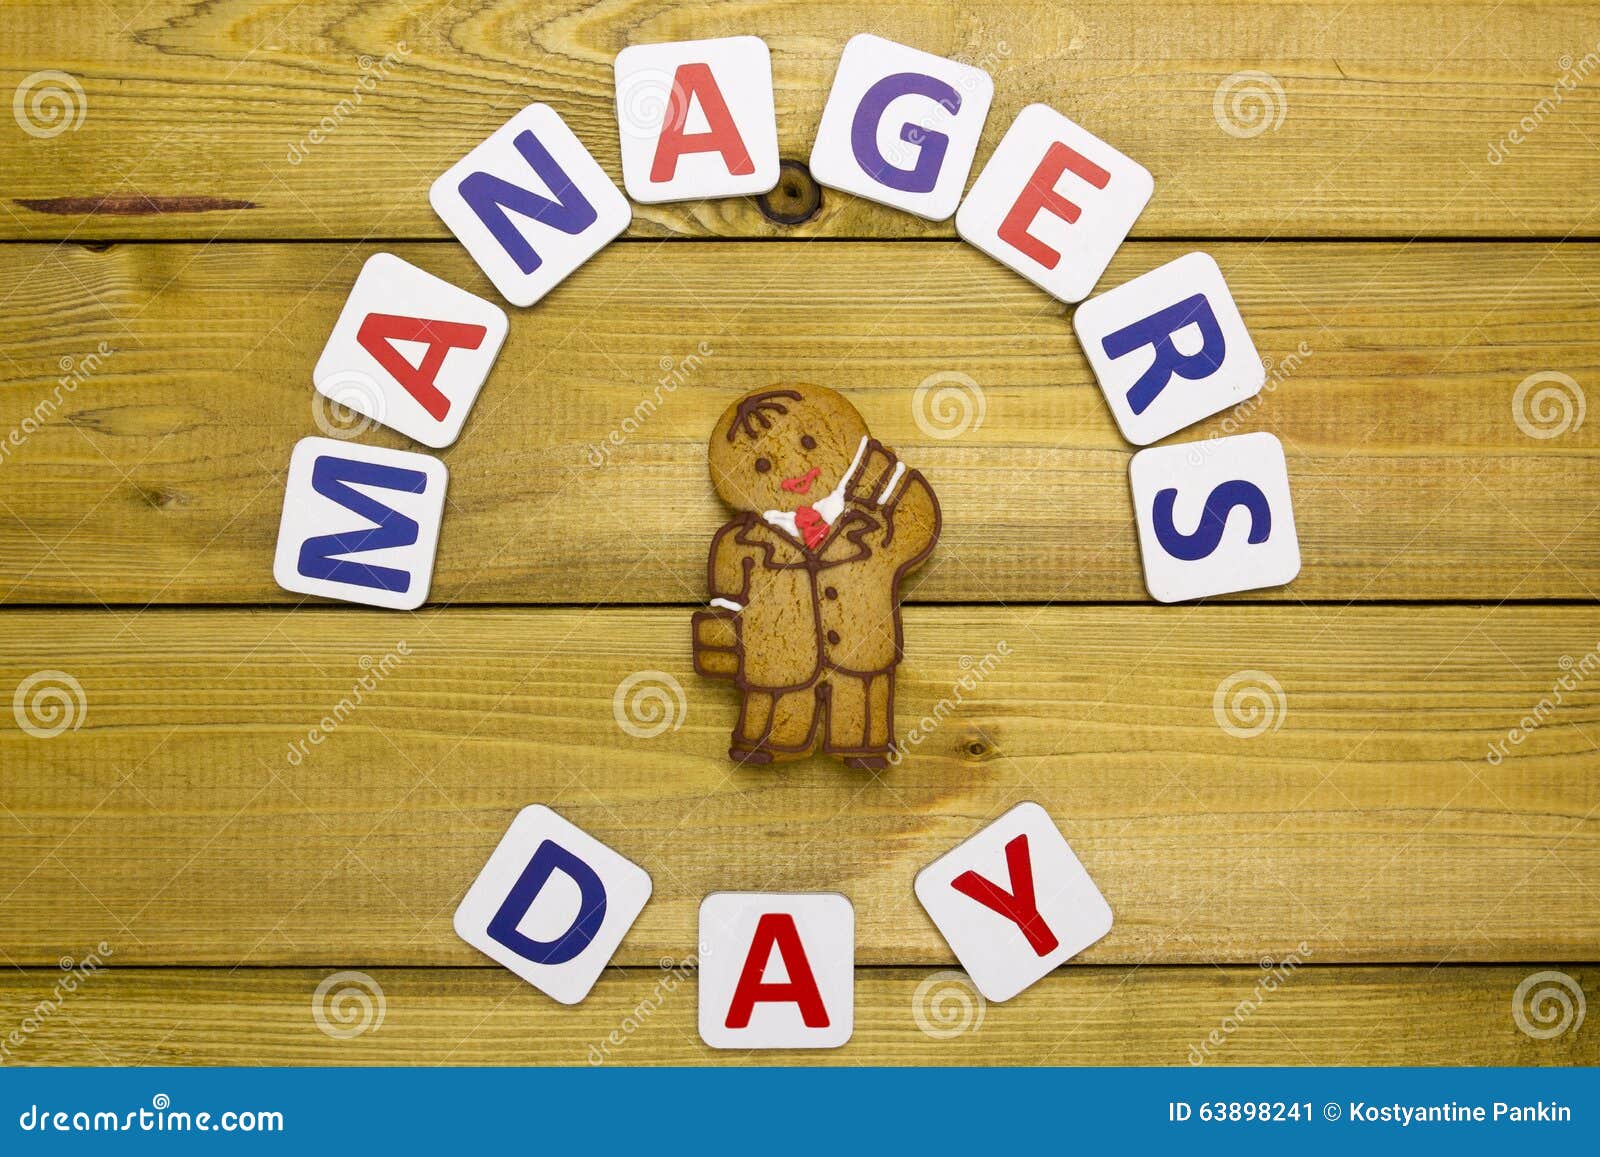 Managers Day Stock Photo Image 63898241